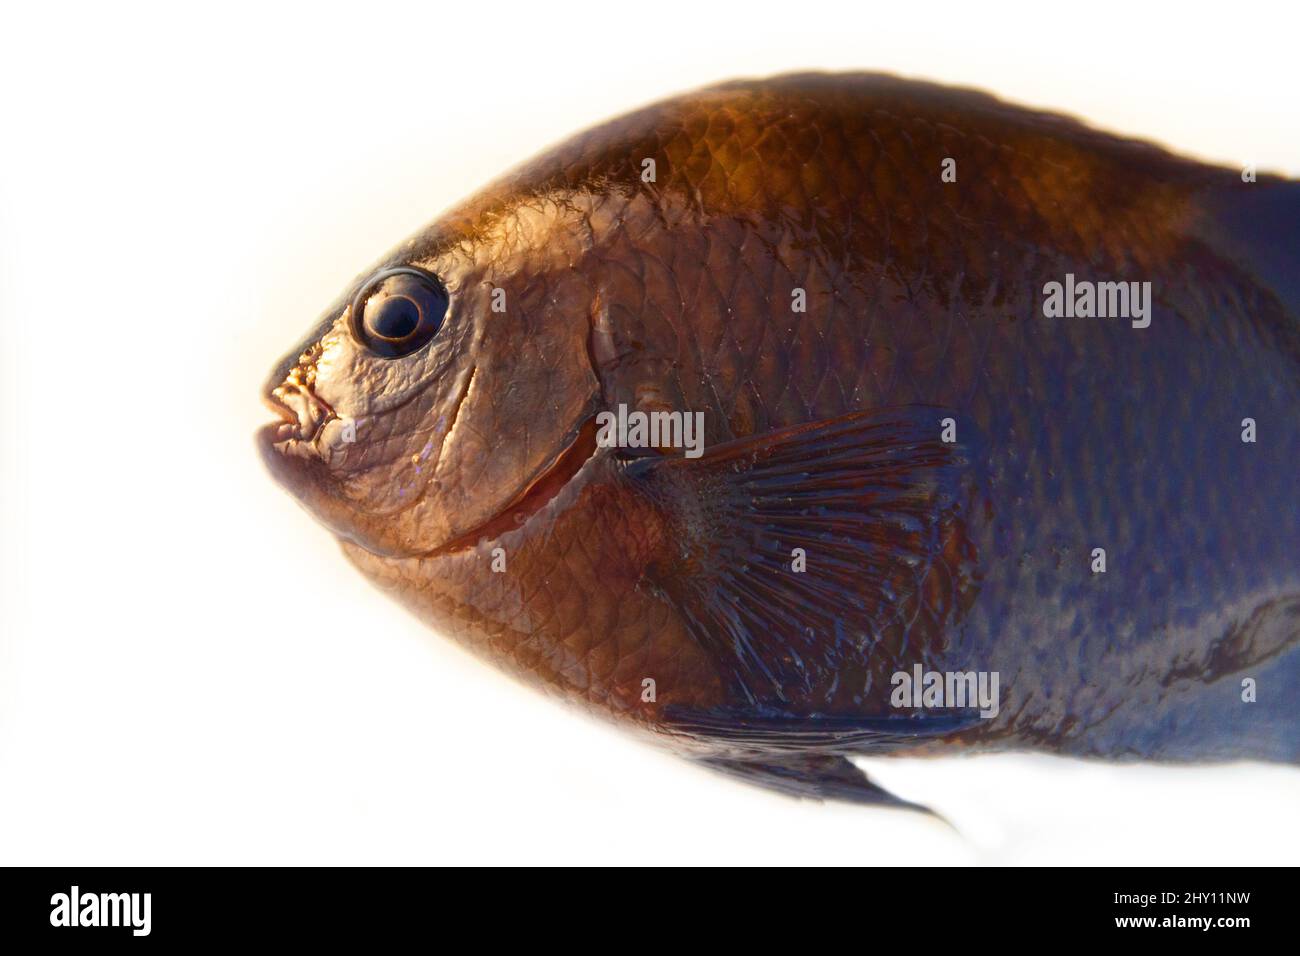 Cichlid (Cichlidae), Red tilapia (oreochromis spp.) artificially bred hybrid. Sri Lanka. The fish is isolated on a white background Stock Photo